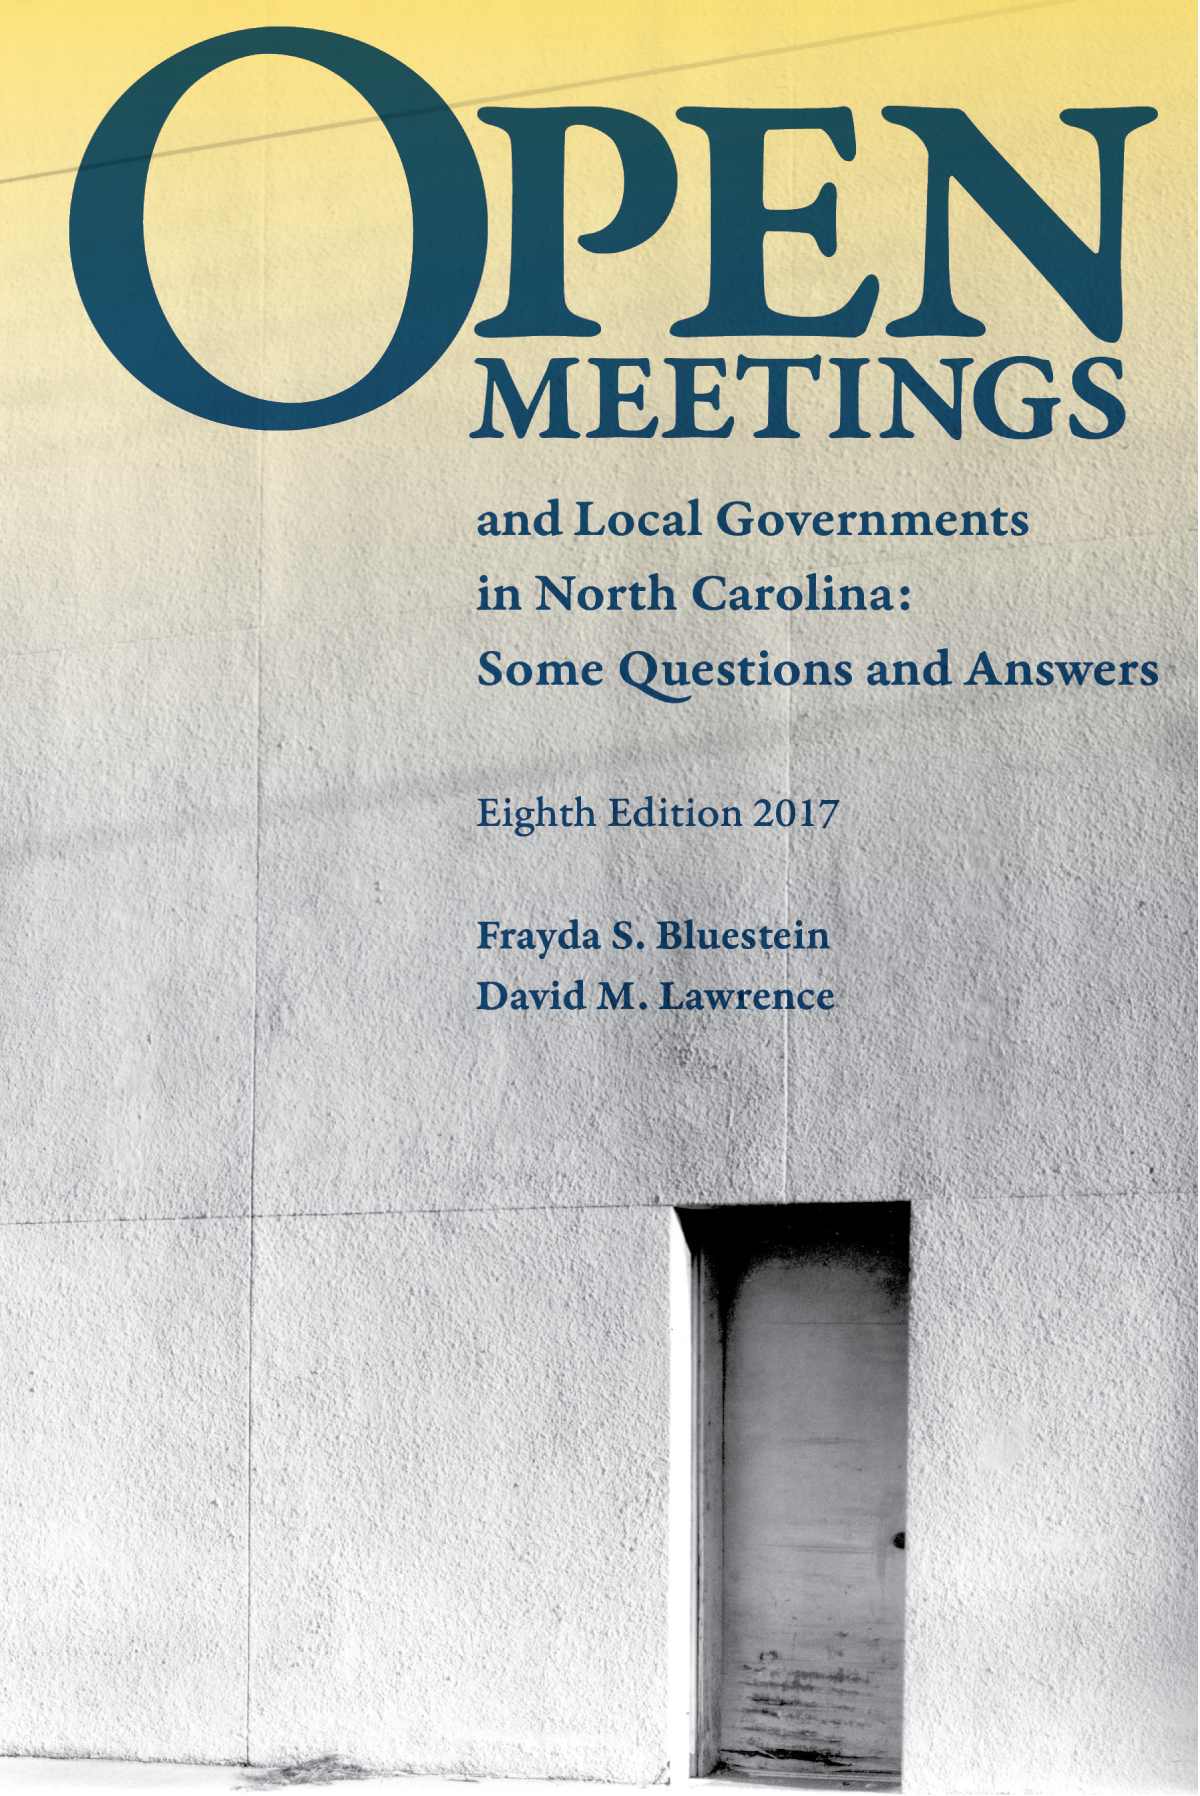 Cover image for Open Meetings and Local Governments in North Carolina: Some Questions and Answers, Eighth Edition, 2017